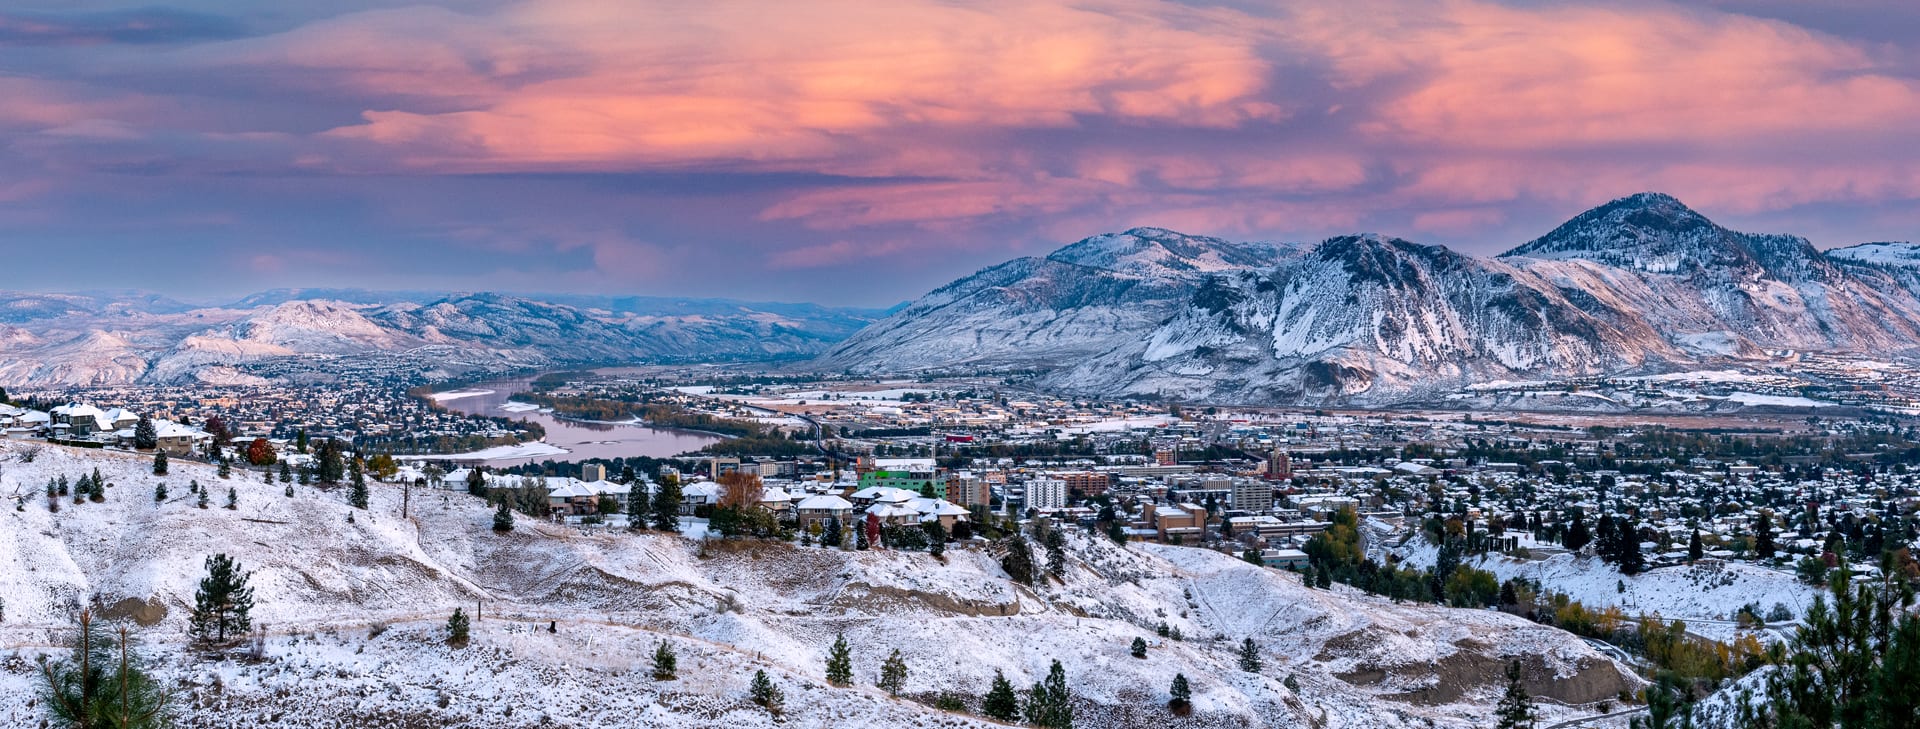 snowy mountain view with city and trees with pink and blue clouds